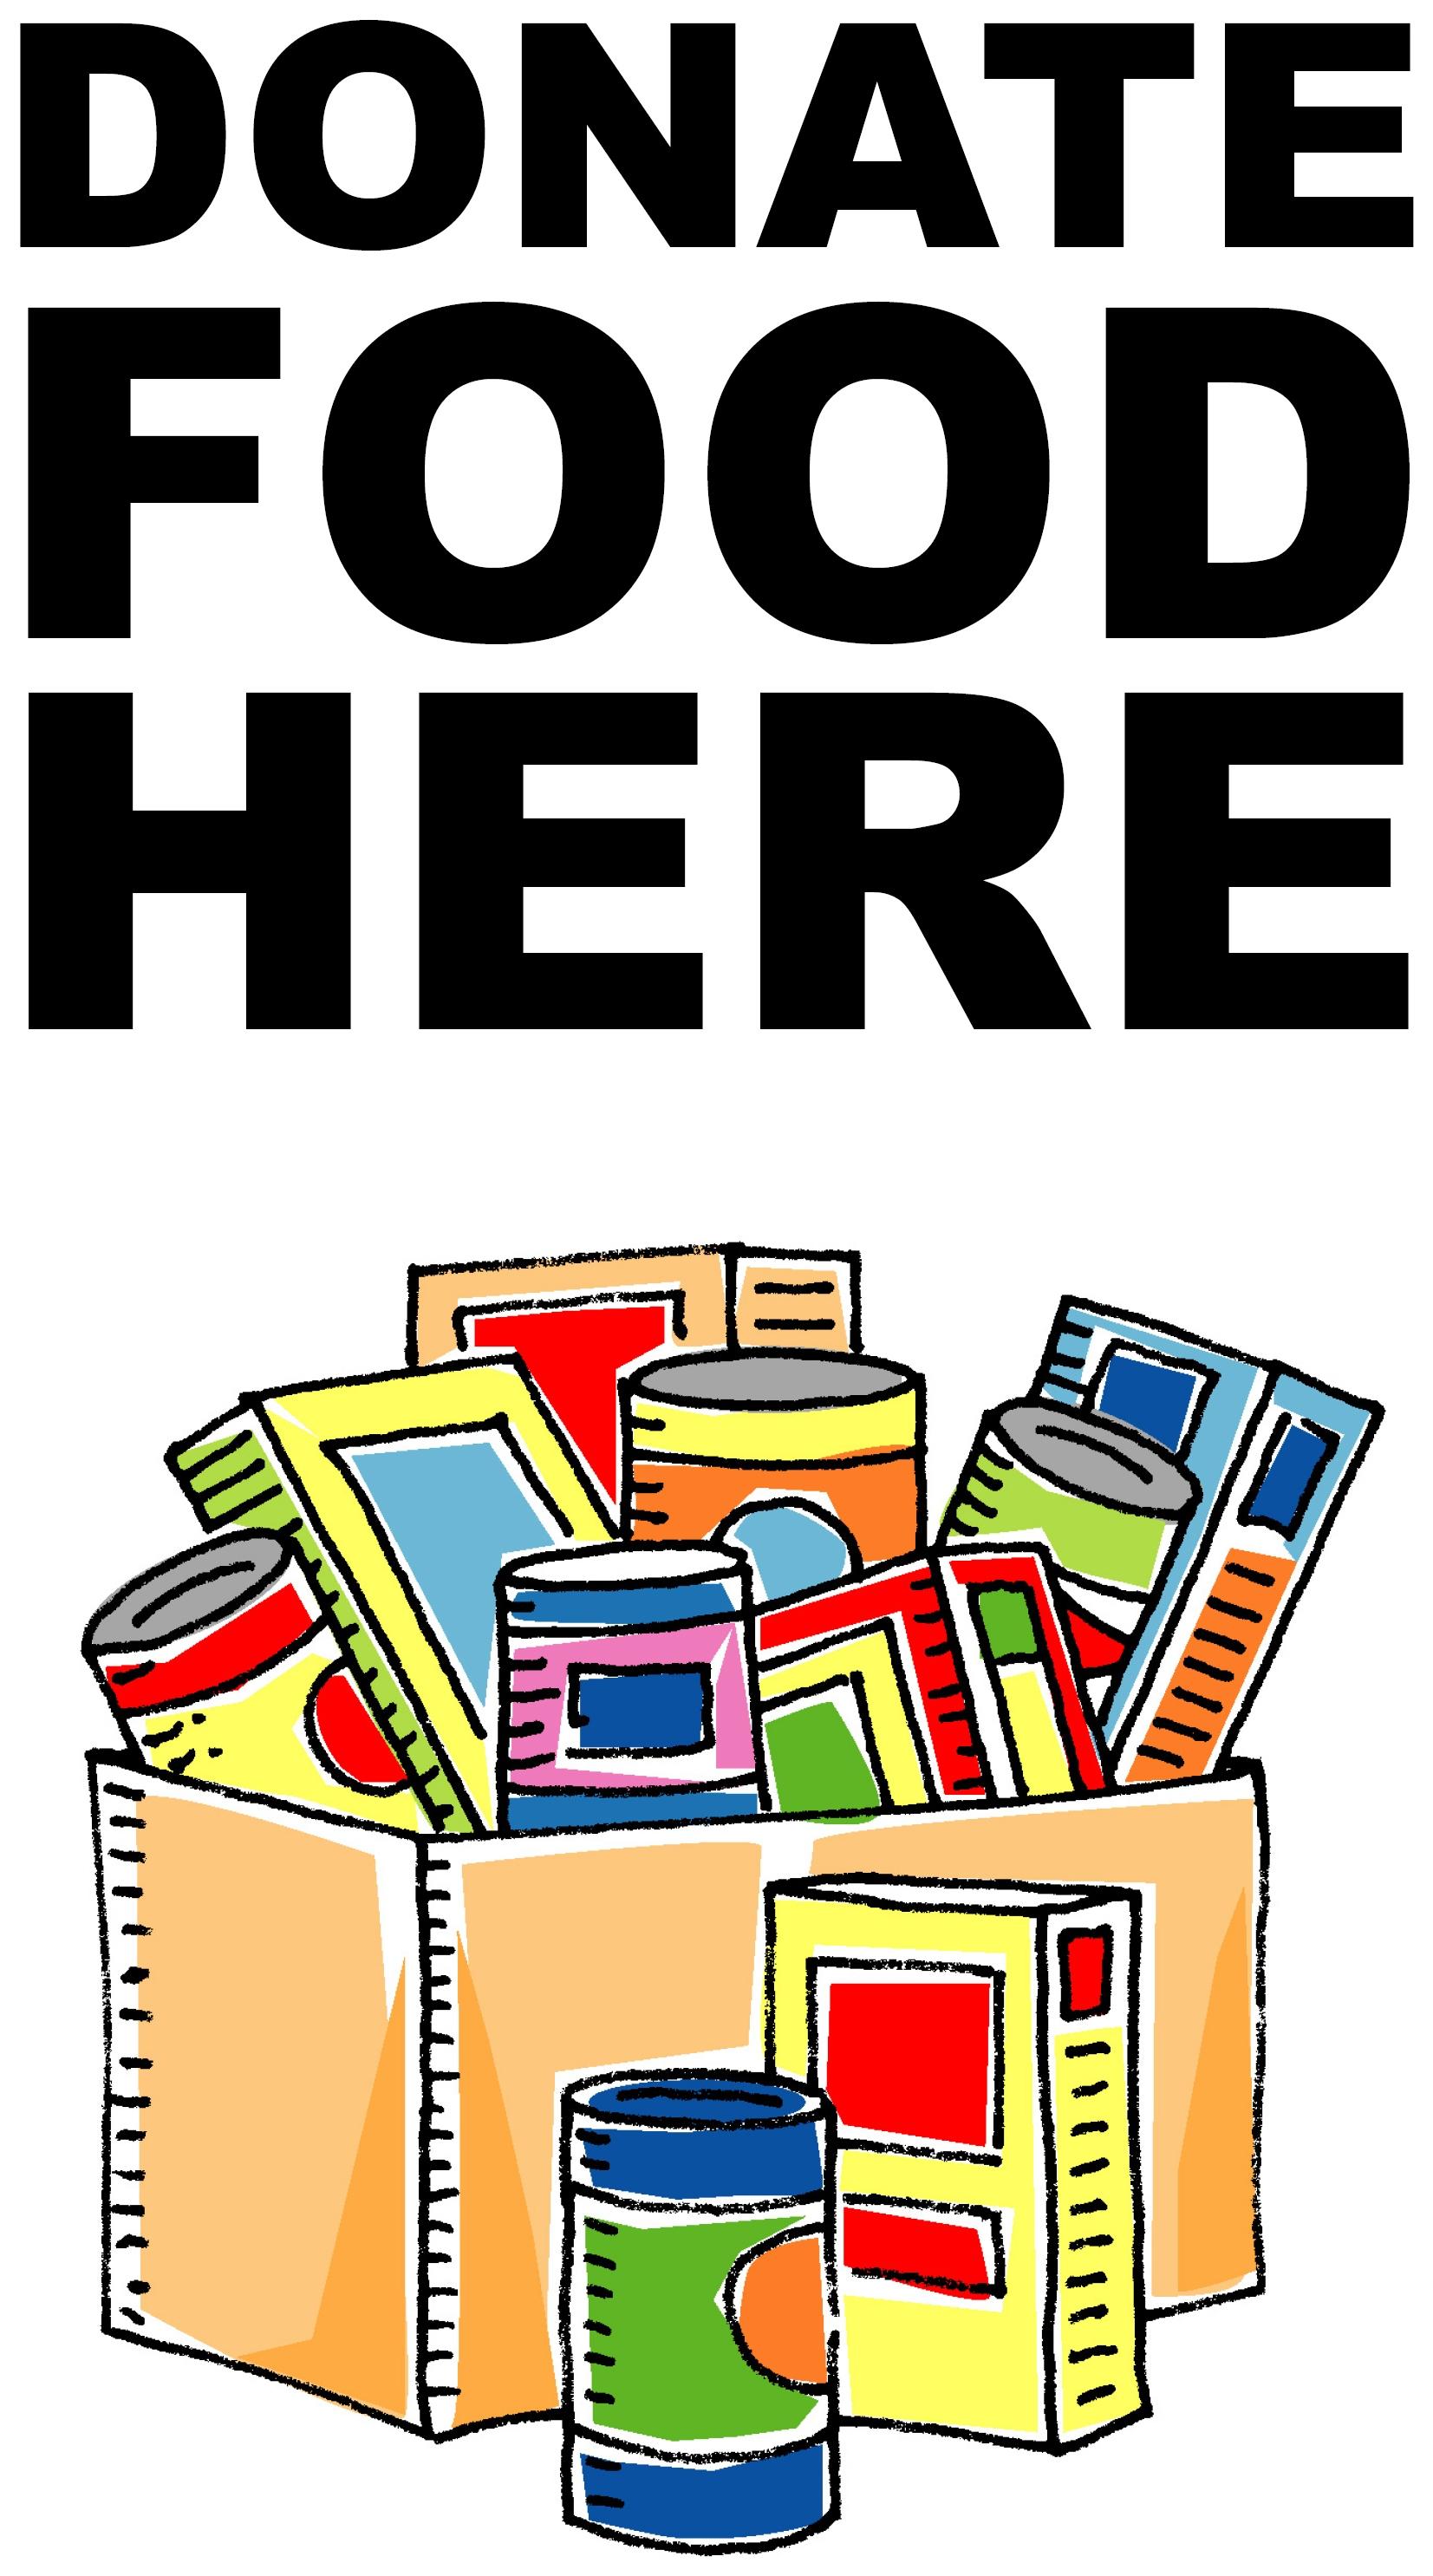 Canned Food Drive Slogans Can - Canned Food Drive Clip Art